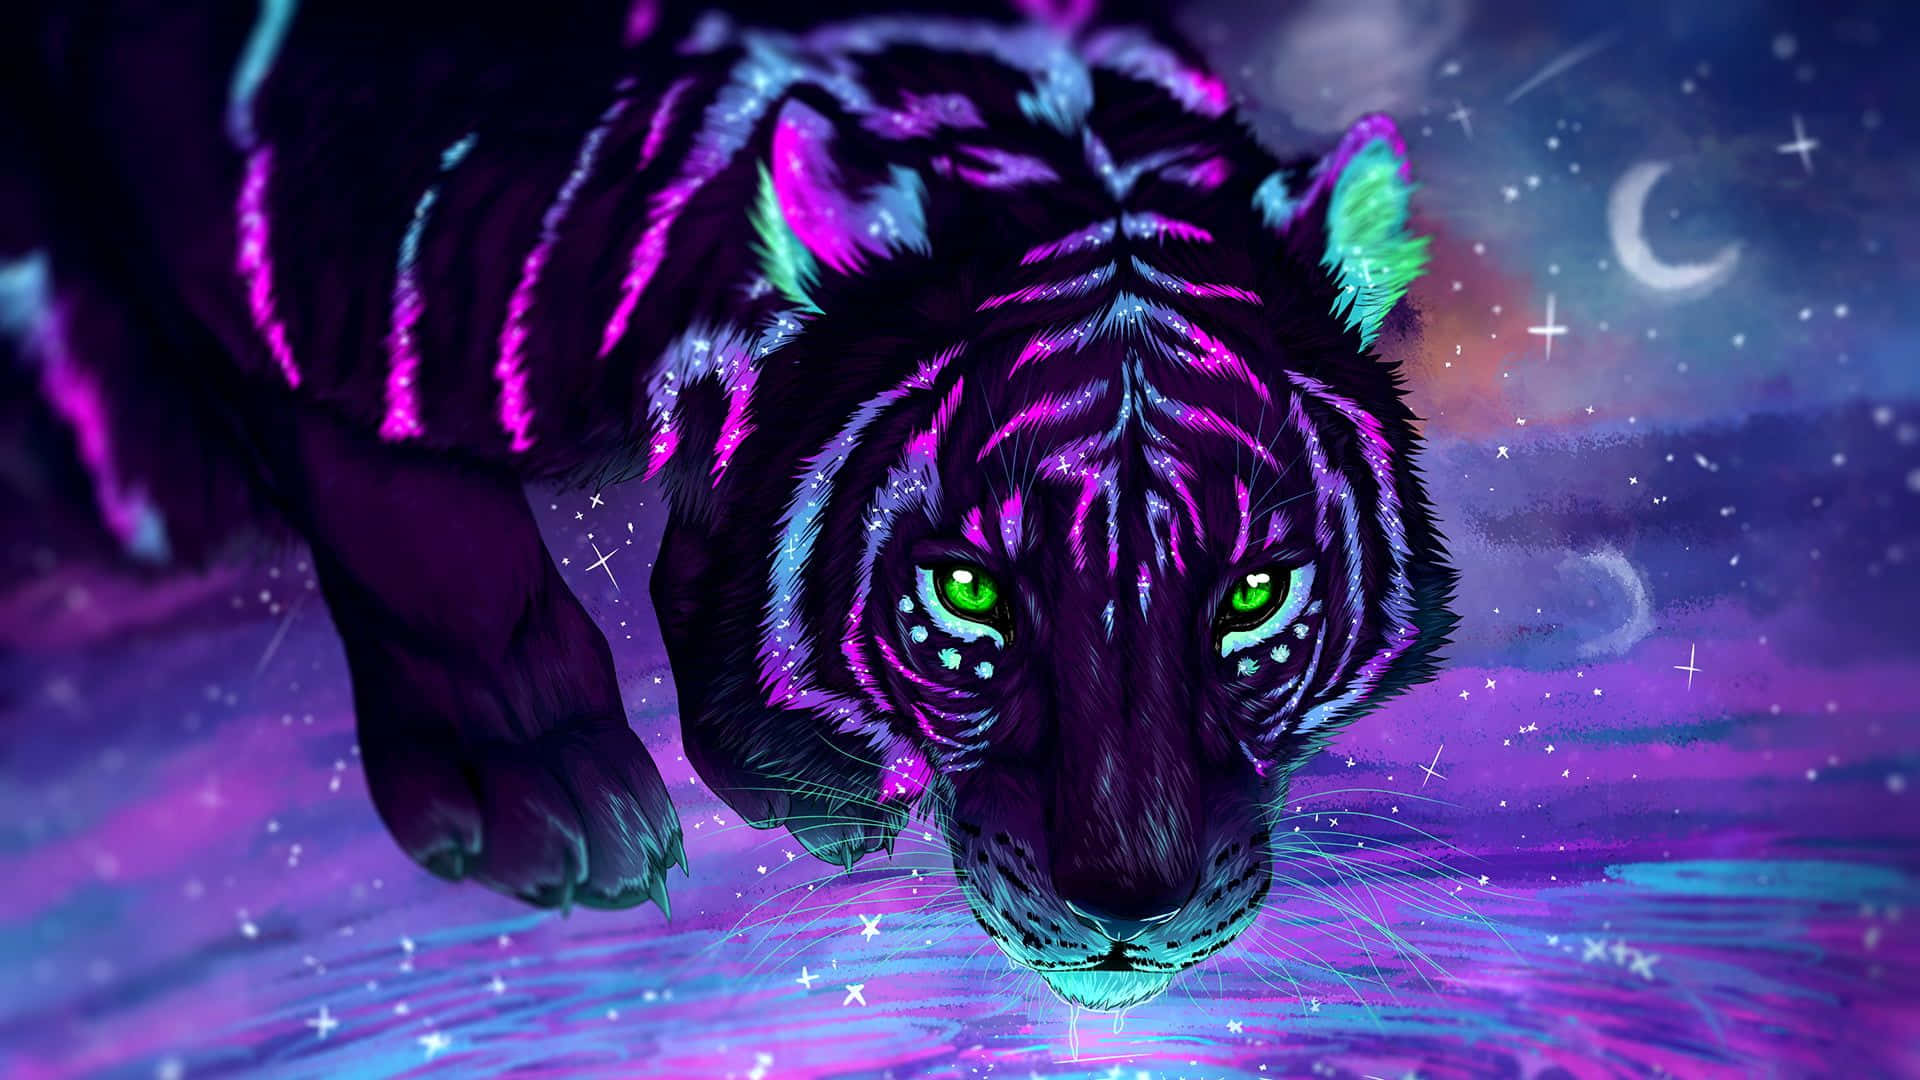 The Majesty of Tiger Galaxy" Wallpaper